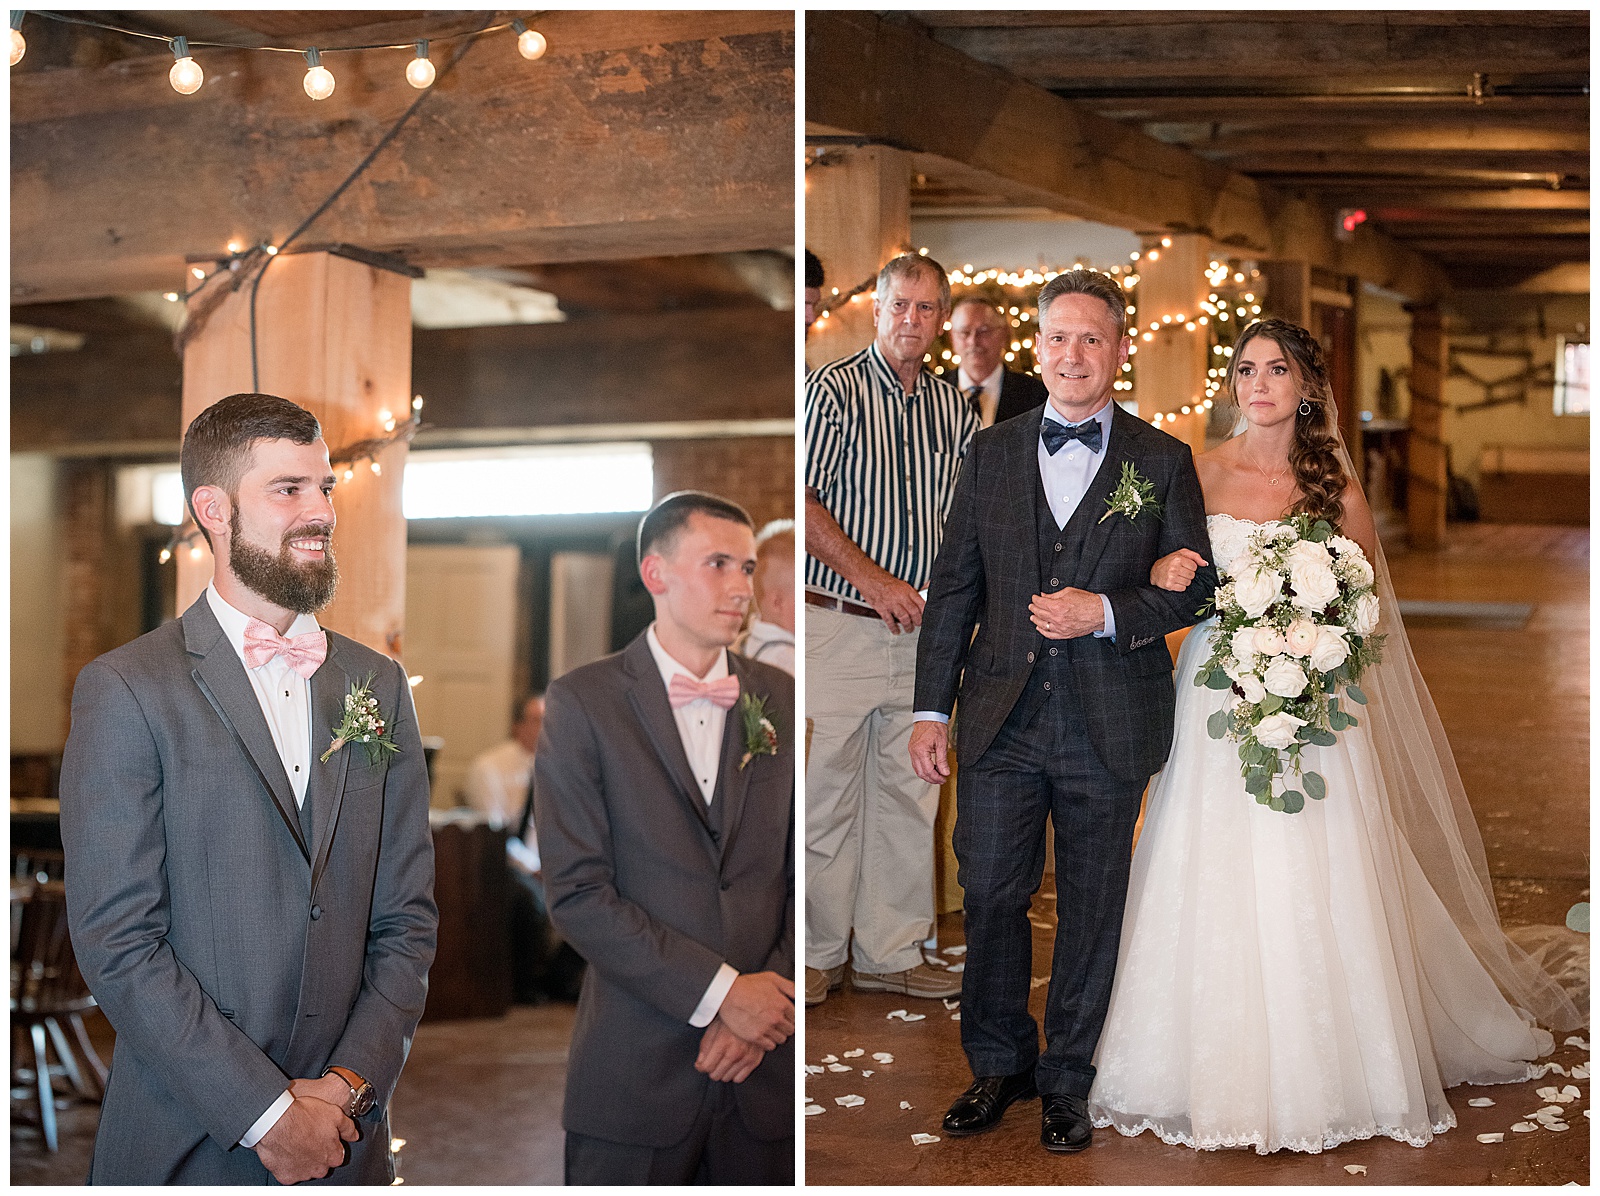 groom smiling as bride walks down the aisle with her dad inside barn at Country Barn